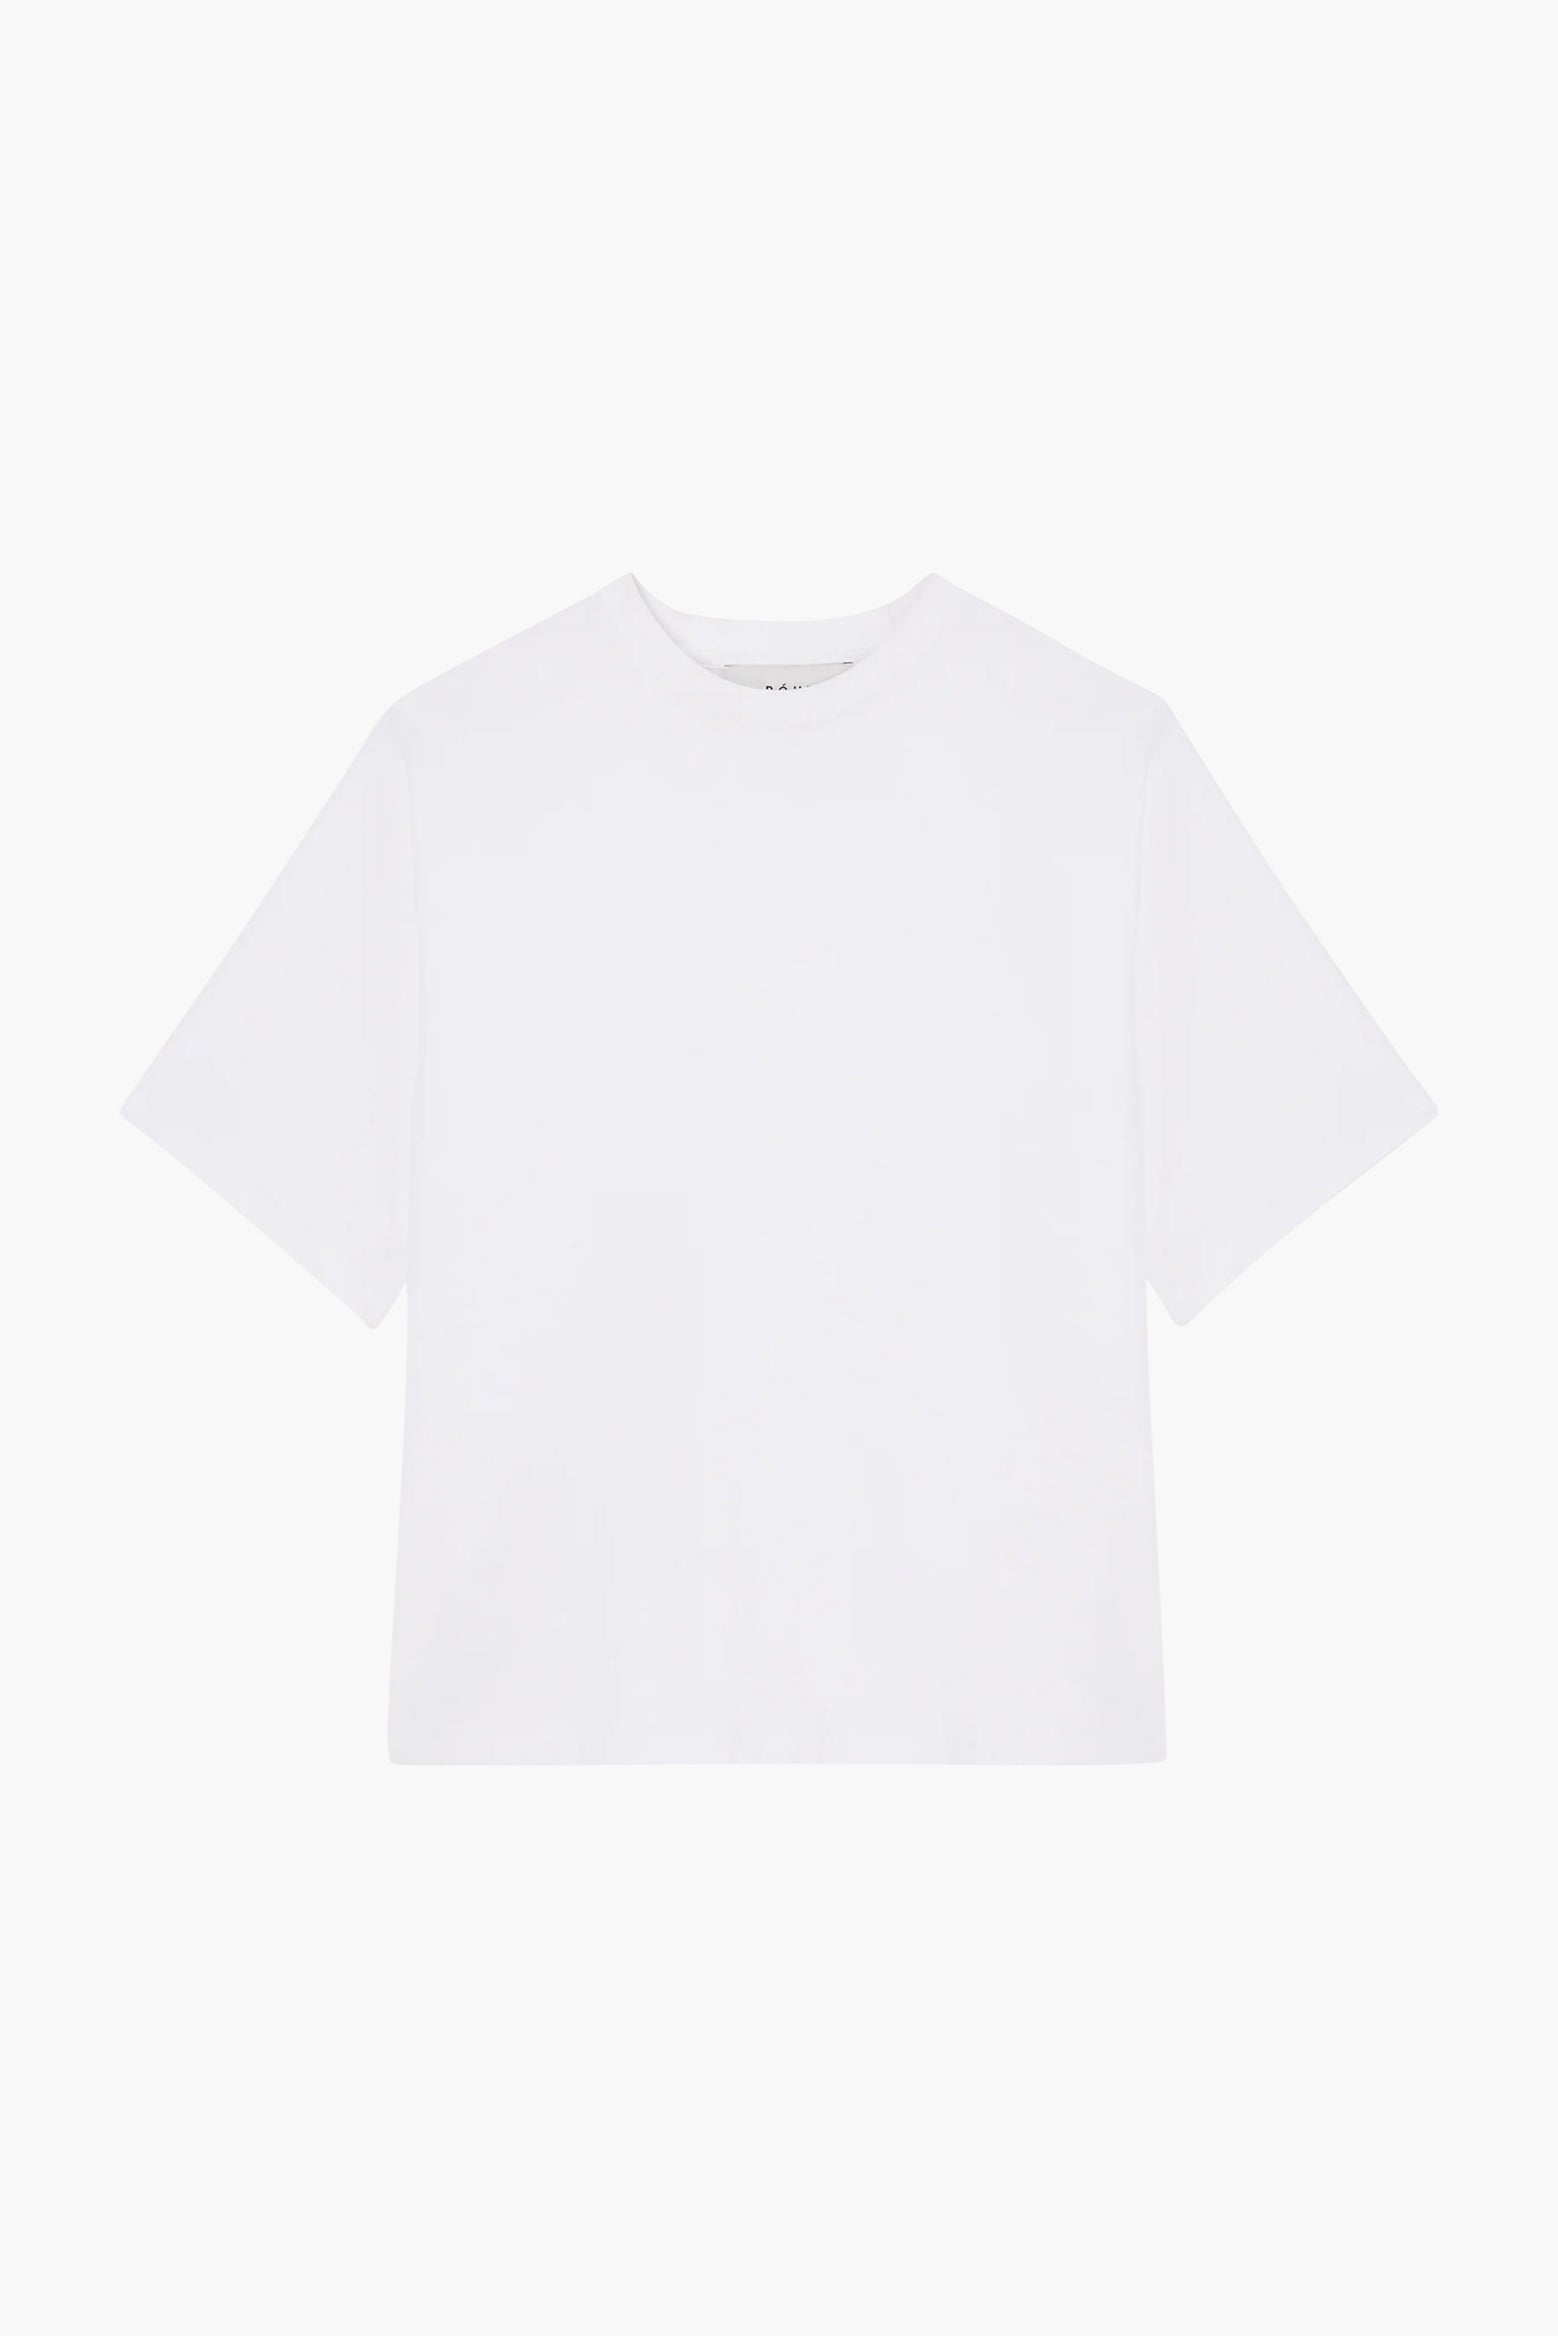 Rohe Classic T-Shirt in White available at TNT The New Trend Australia